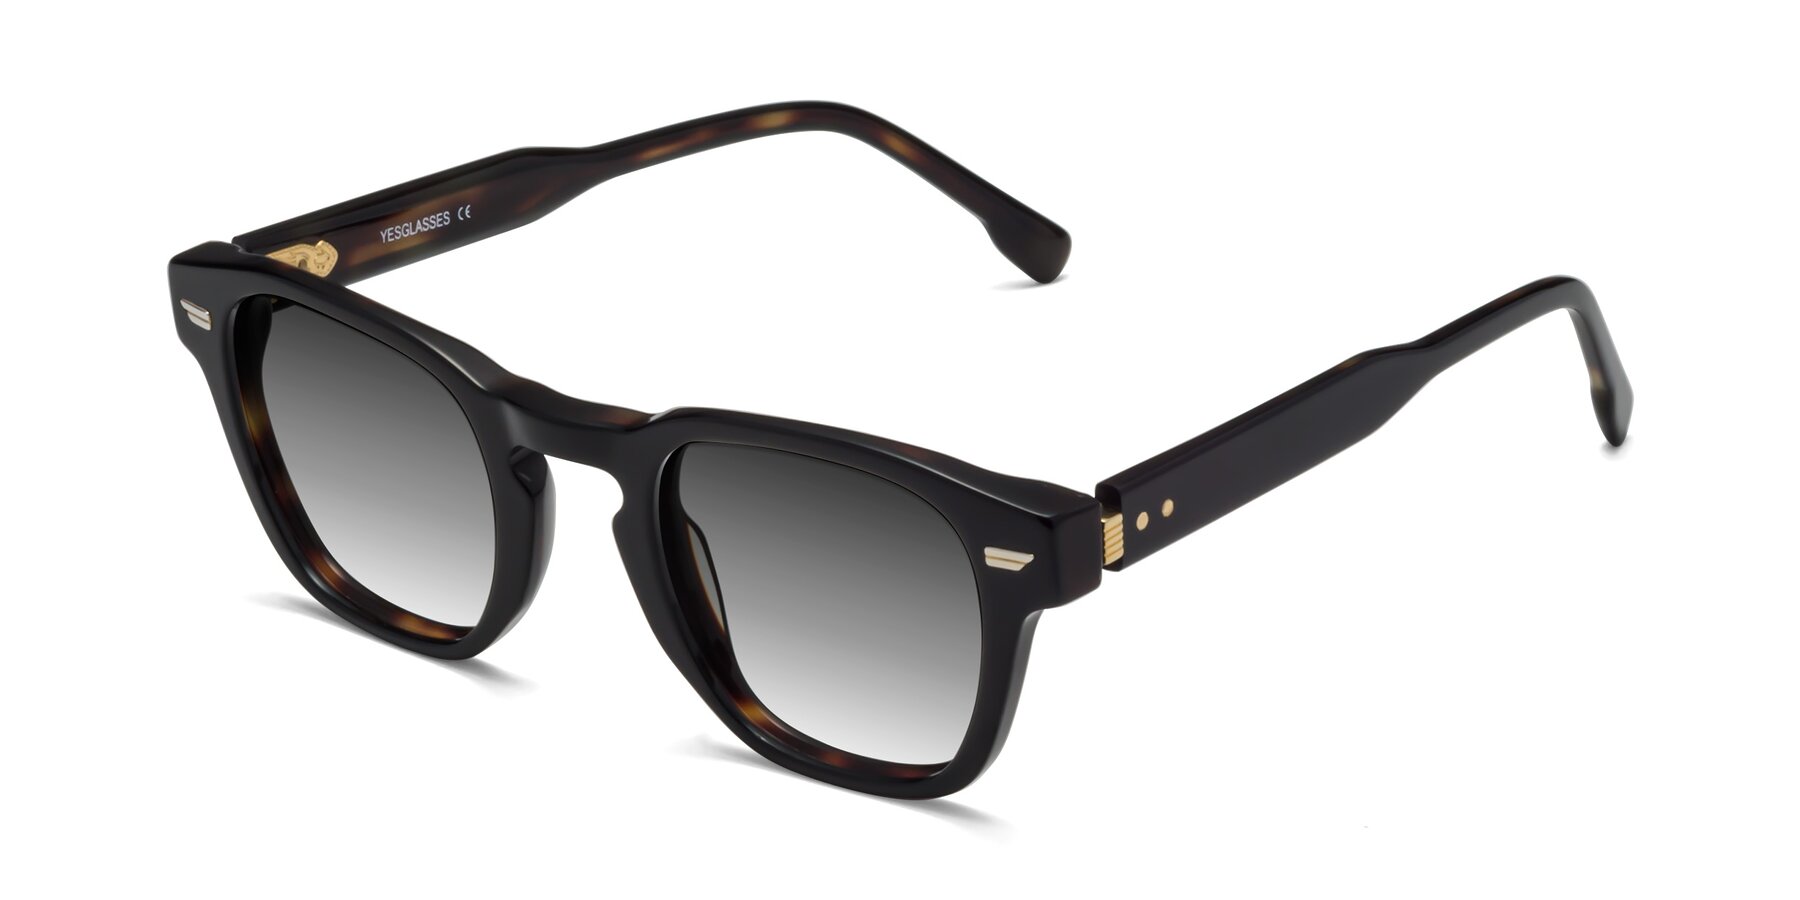 Angle of Costa in Black-Tortoise with Gray Gradient Lenses